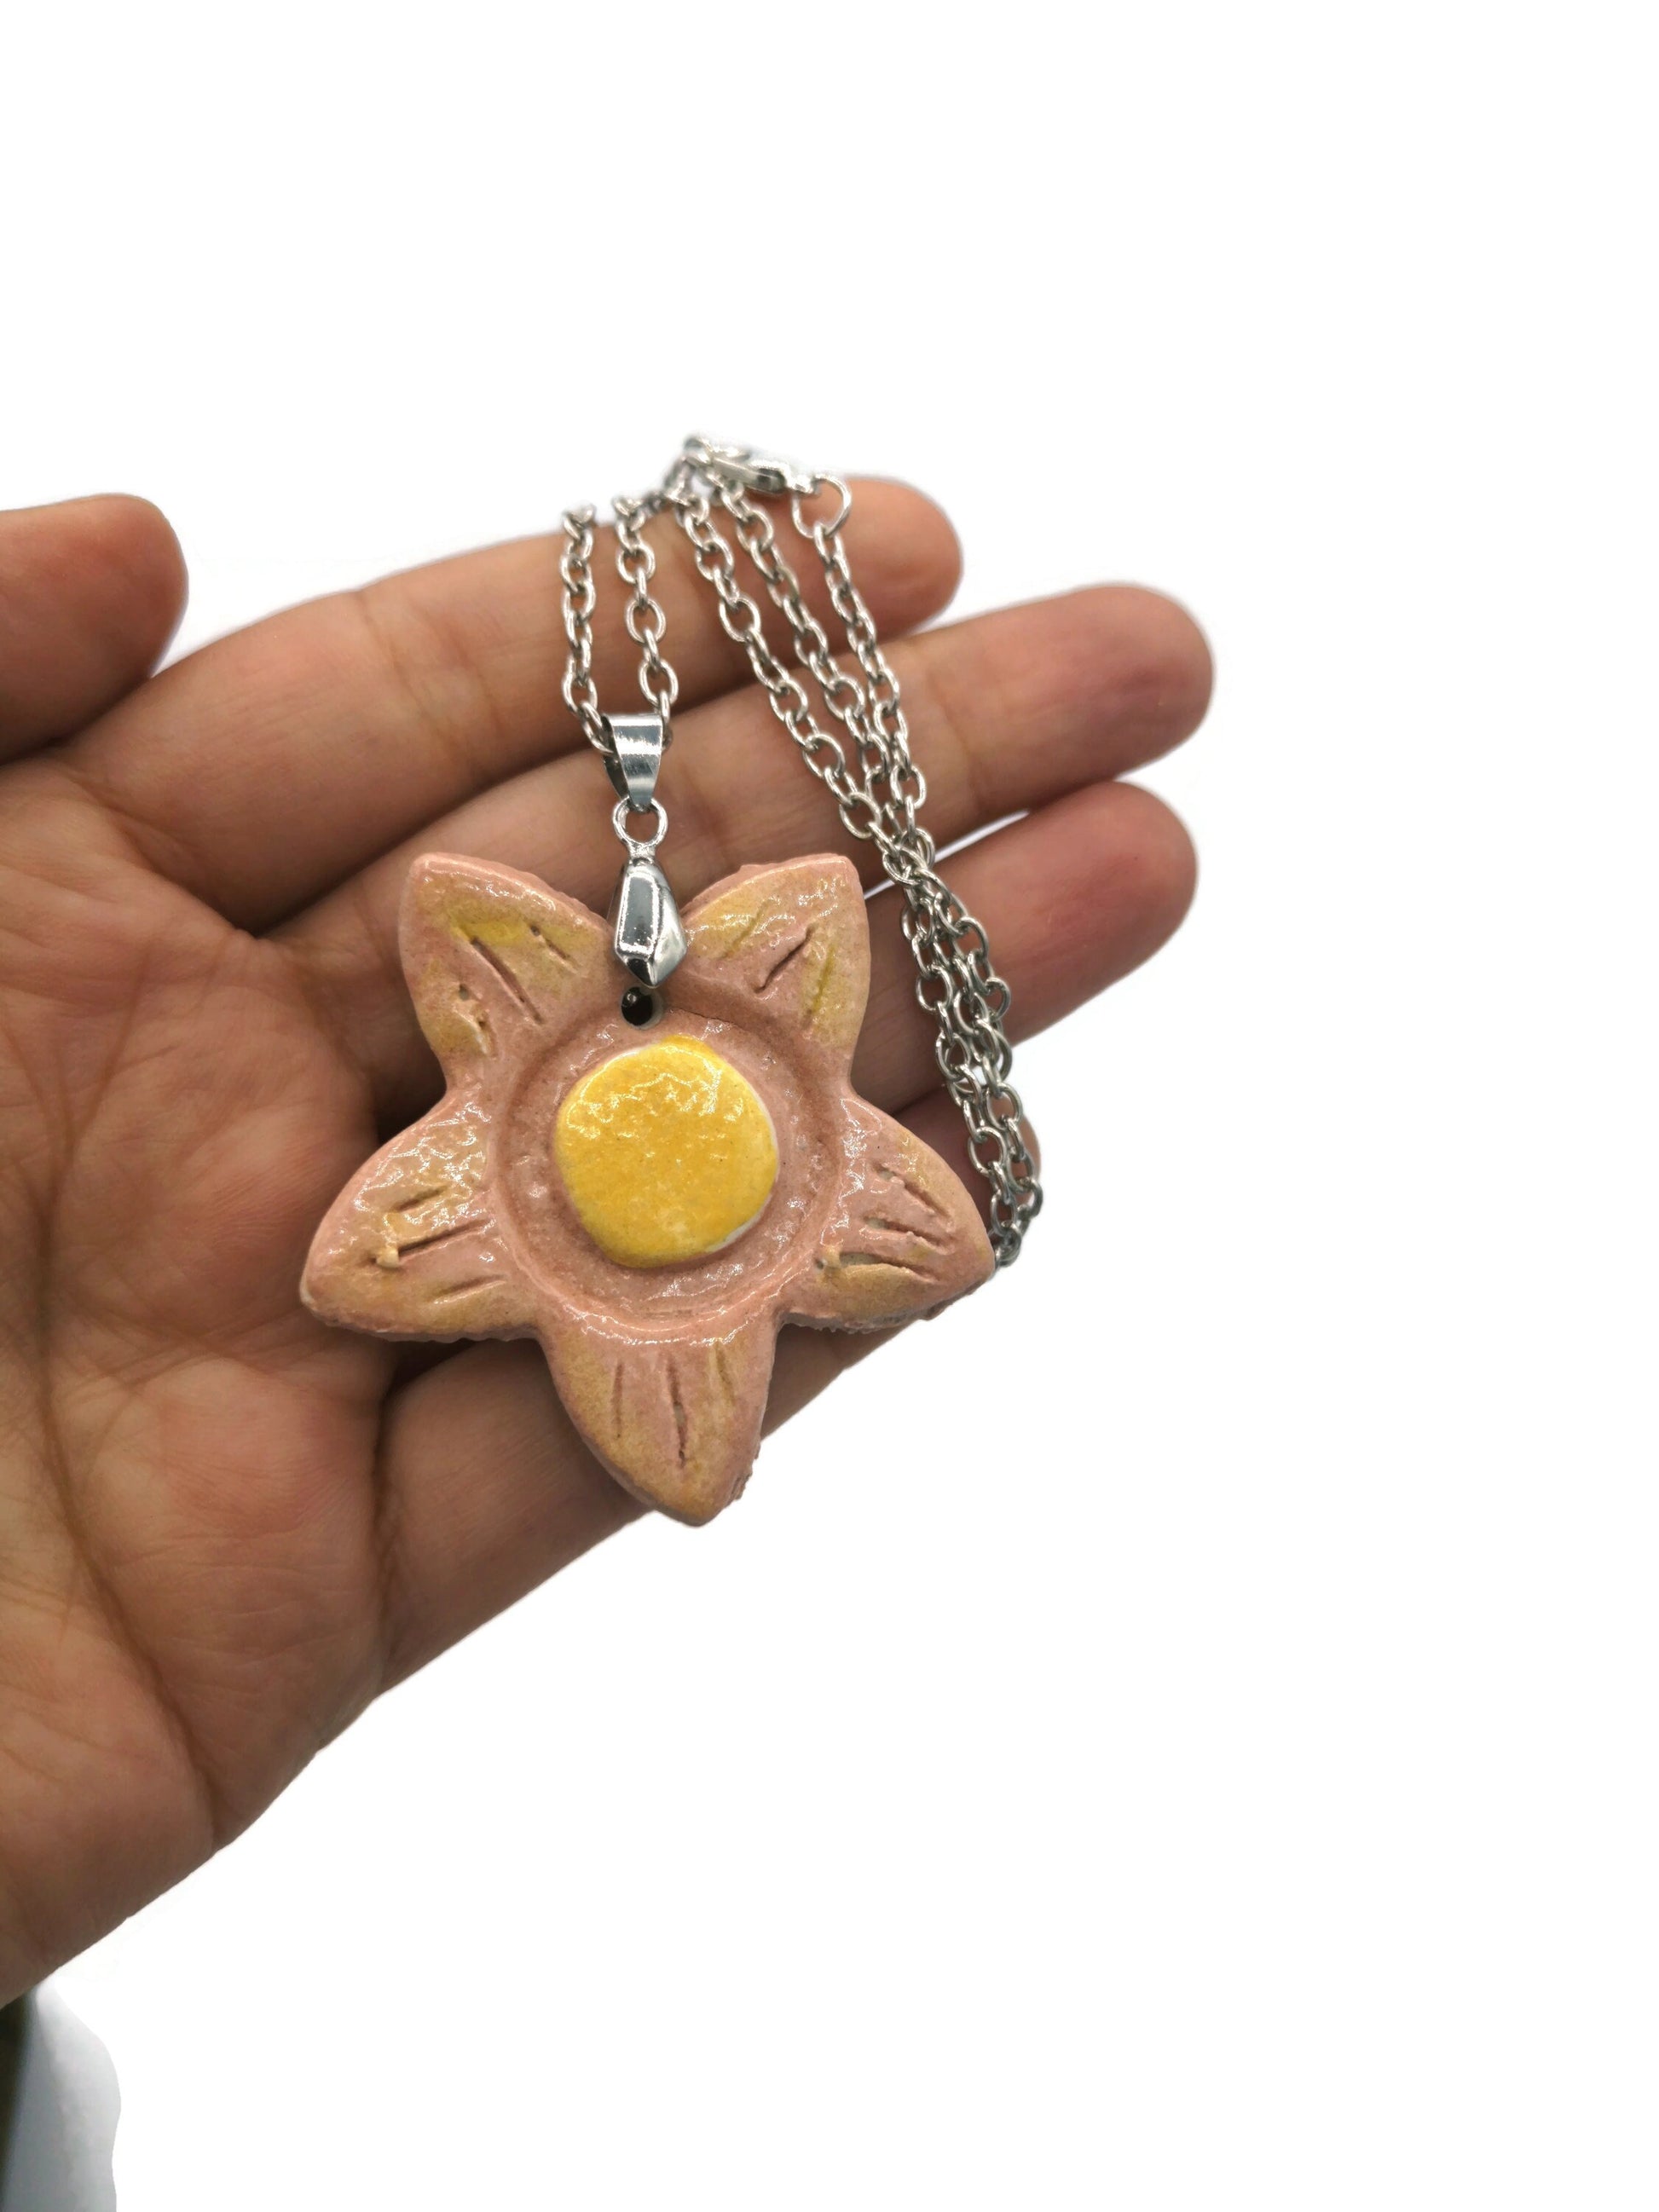 Flower Pendant Necklace, Cute Mothers Day Gift Statement Chocker Necklace, Kawaii Jewelry Best Gift For Her, Mom Birthday Gift From Daughter - Ceramica Ana Rafael